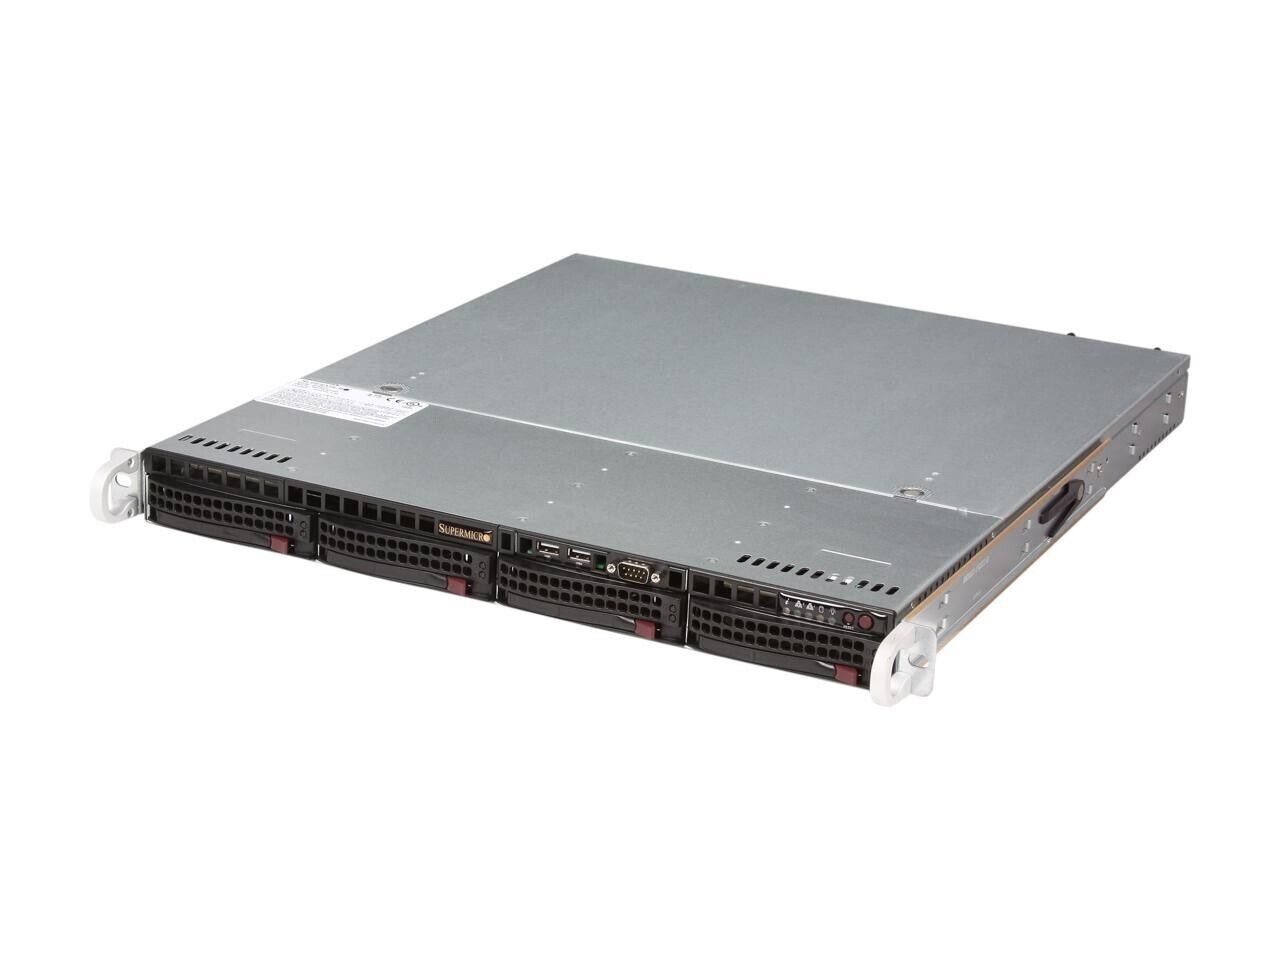 Supermicro SYS-5017R-MTRF Barebones Server with CPU NEW, IN STOCK, 5 Year Wty